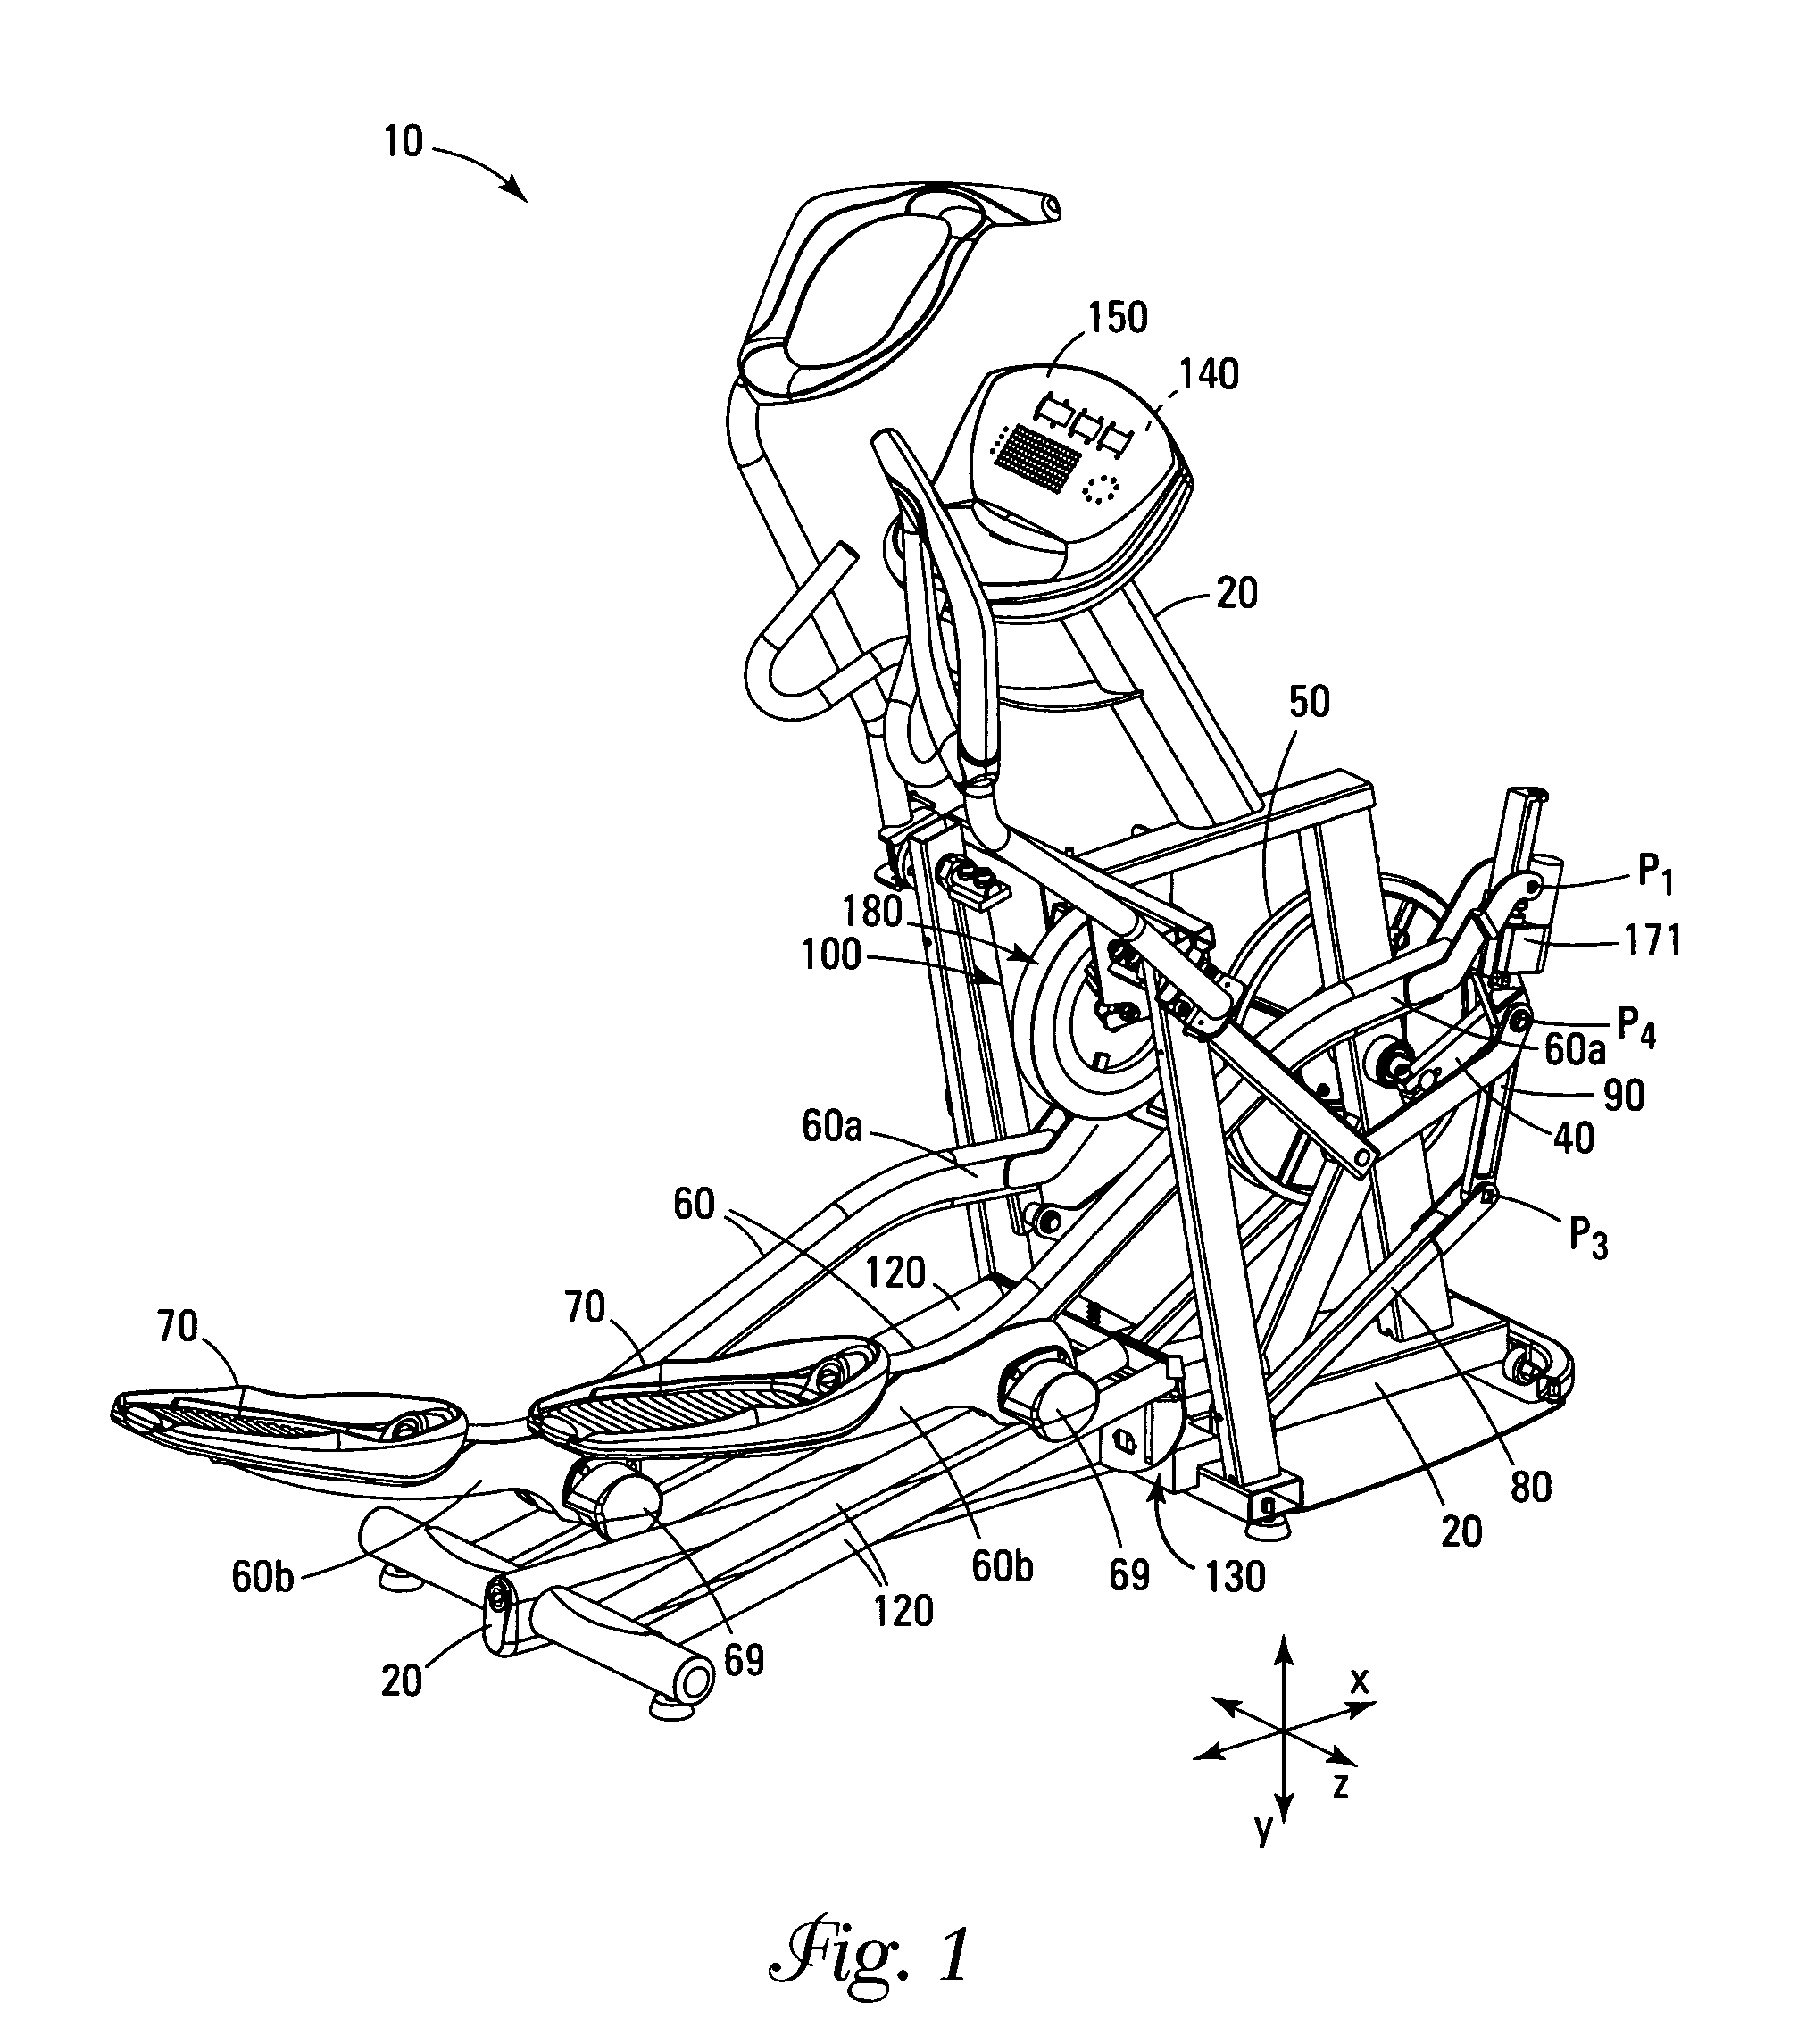 Exercise equipment with automatic adjustment of stride length and/or stride height based upon the heart rate of a person exercising on the exercise equipment